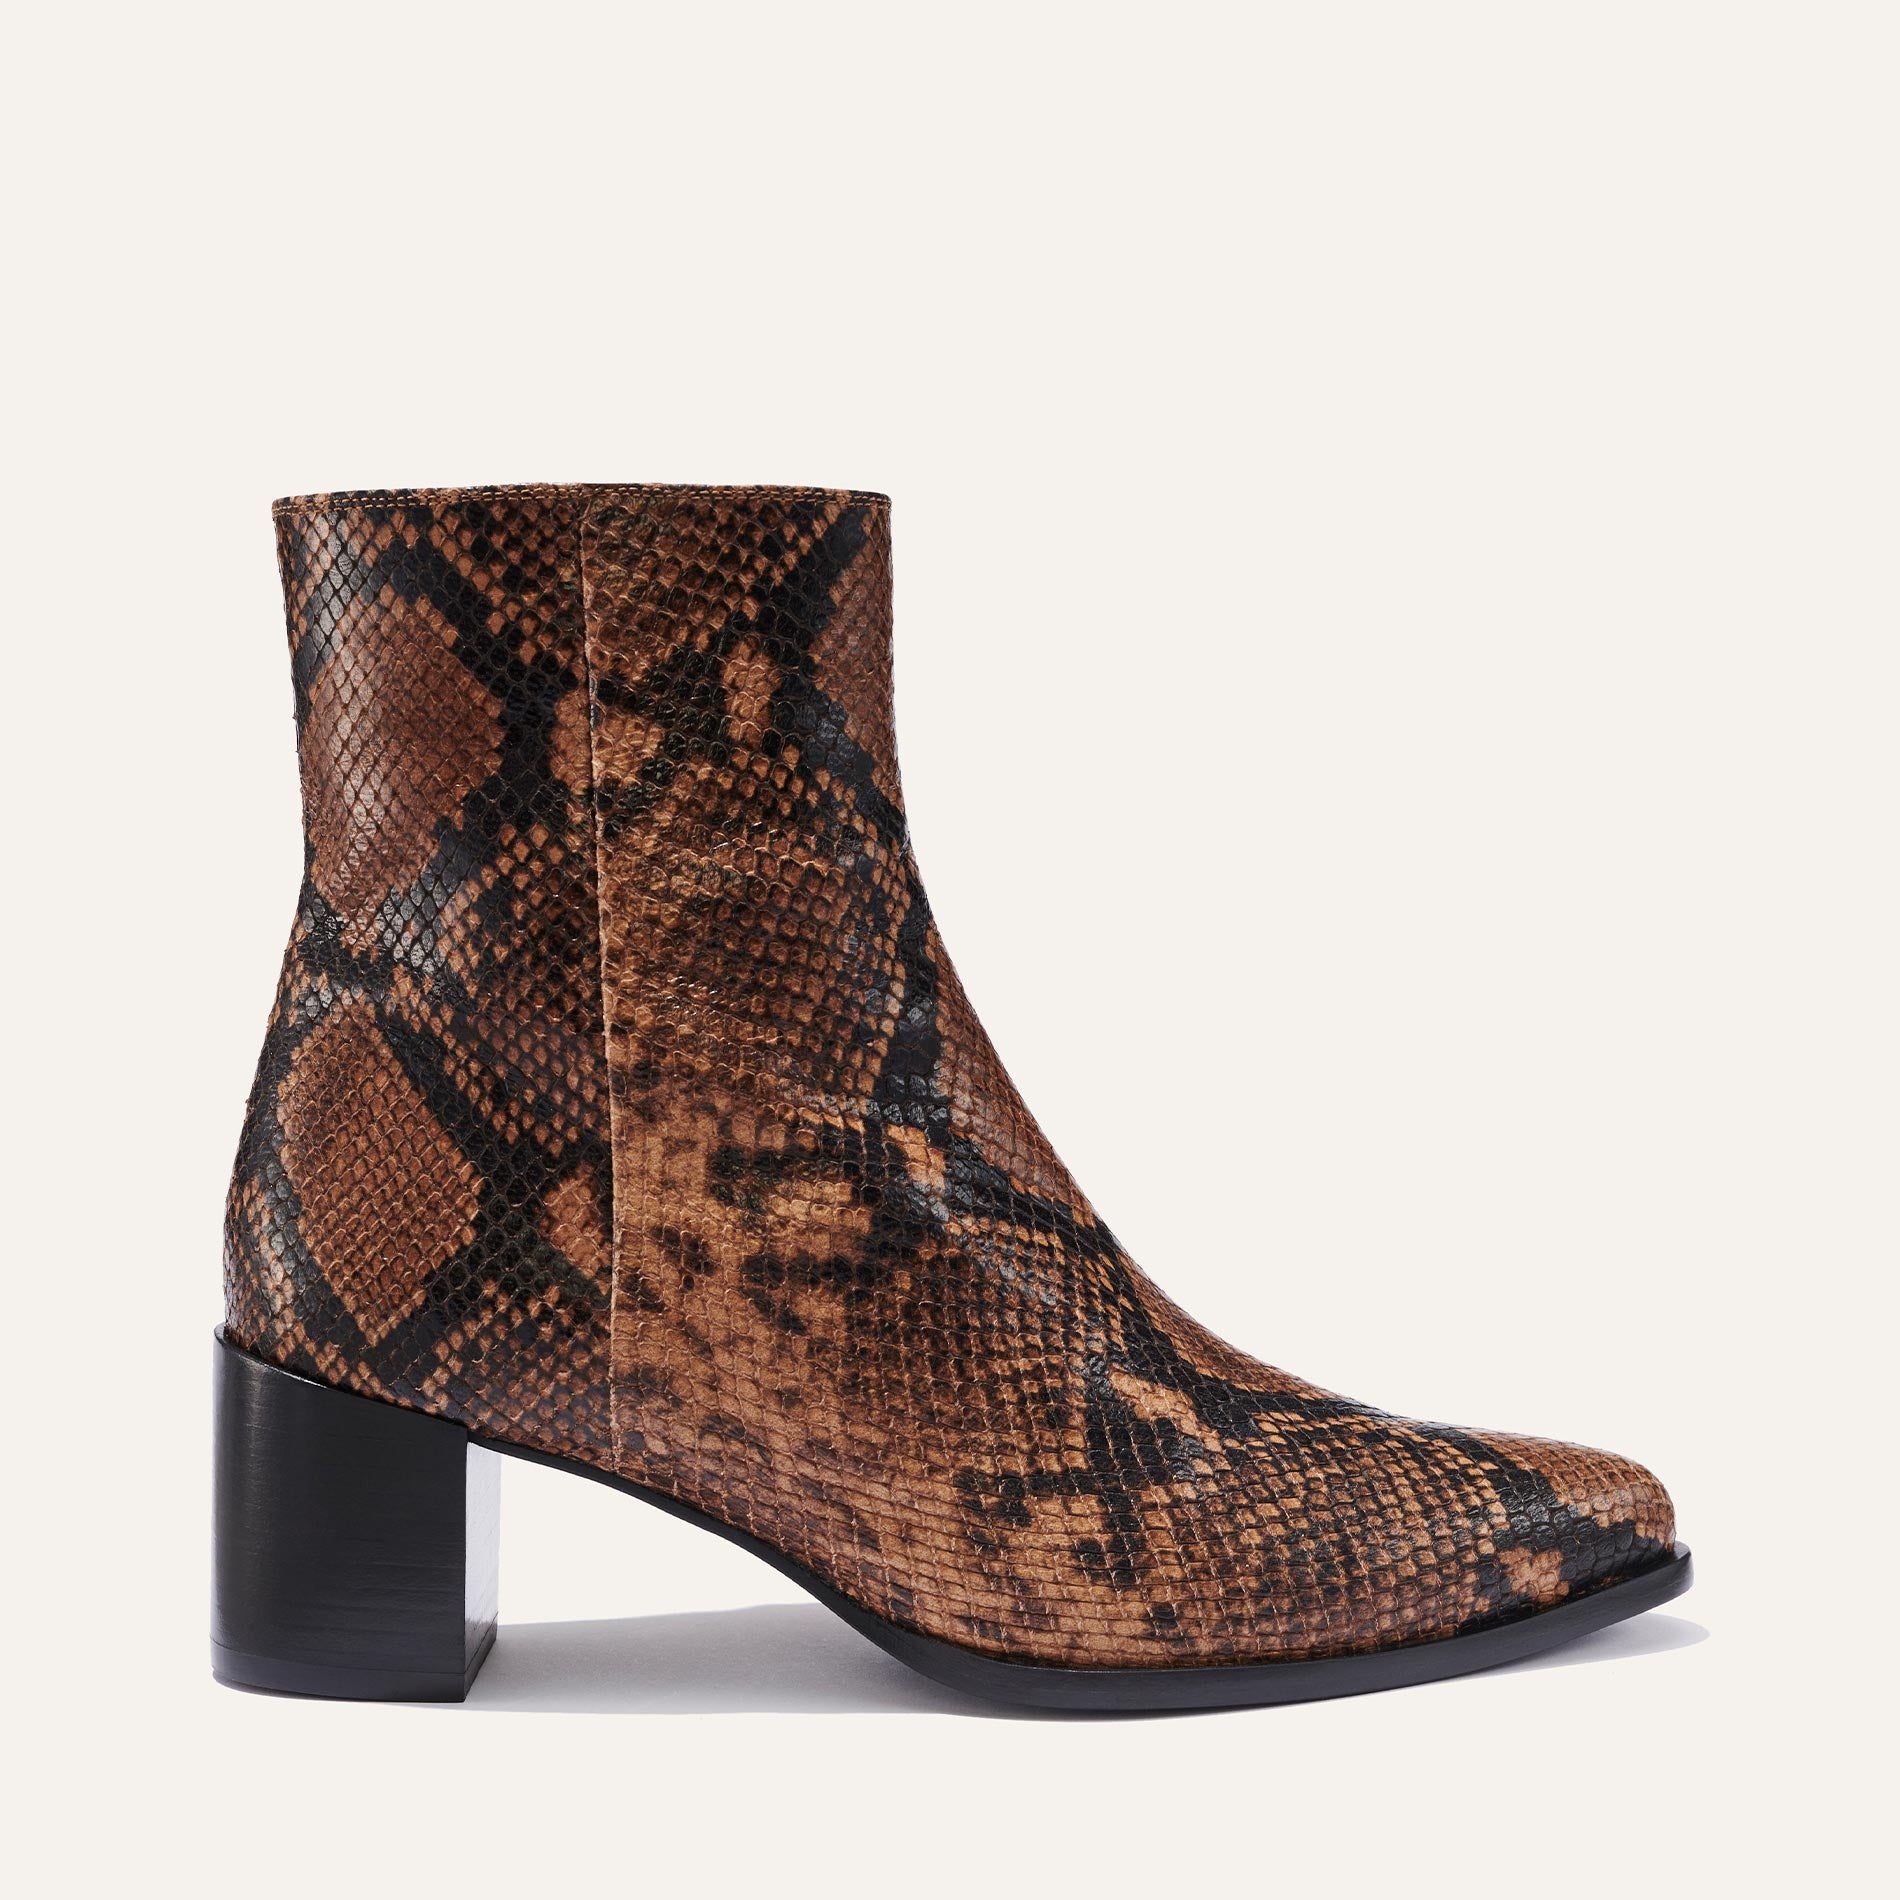 Margaux's classic Downtown Boot in brown python-embossed leather with a comfortable block heel and pointed toe